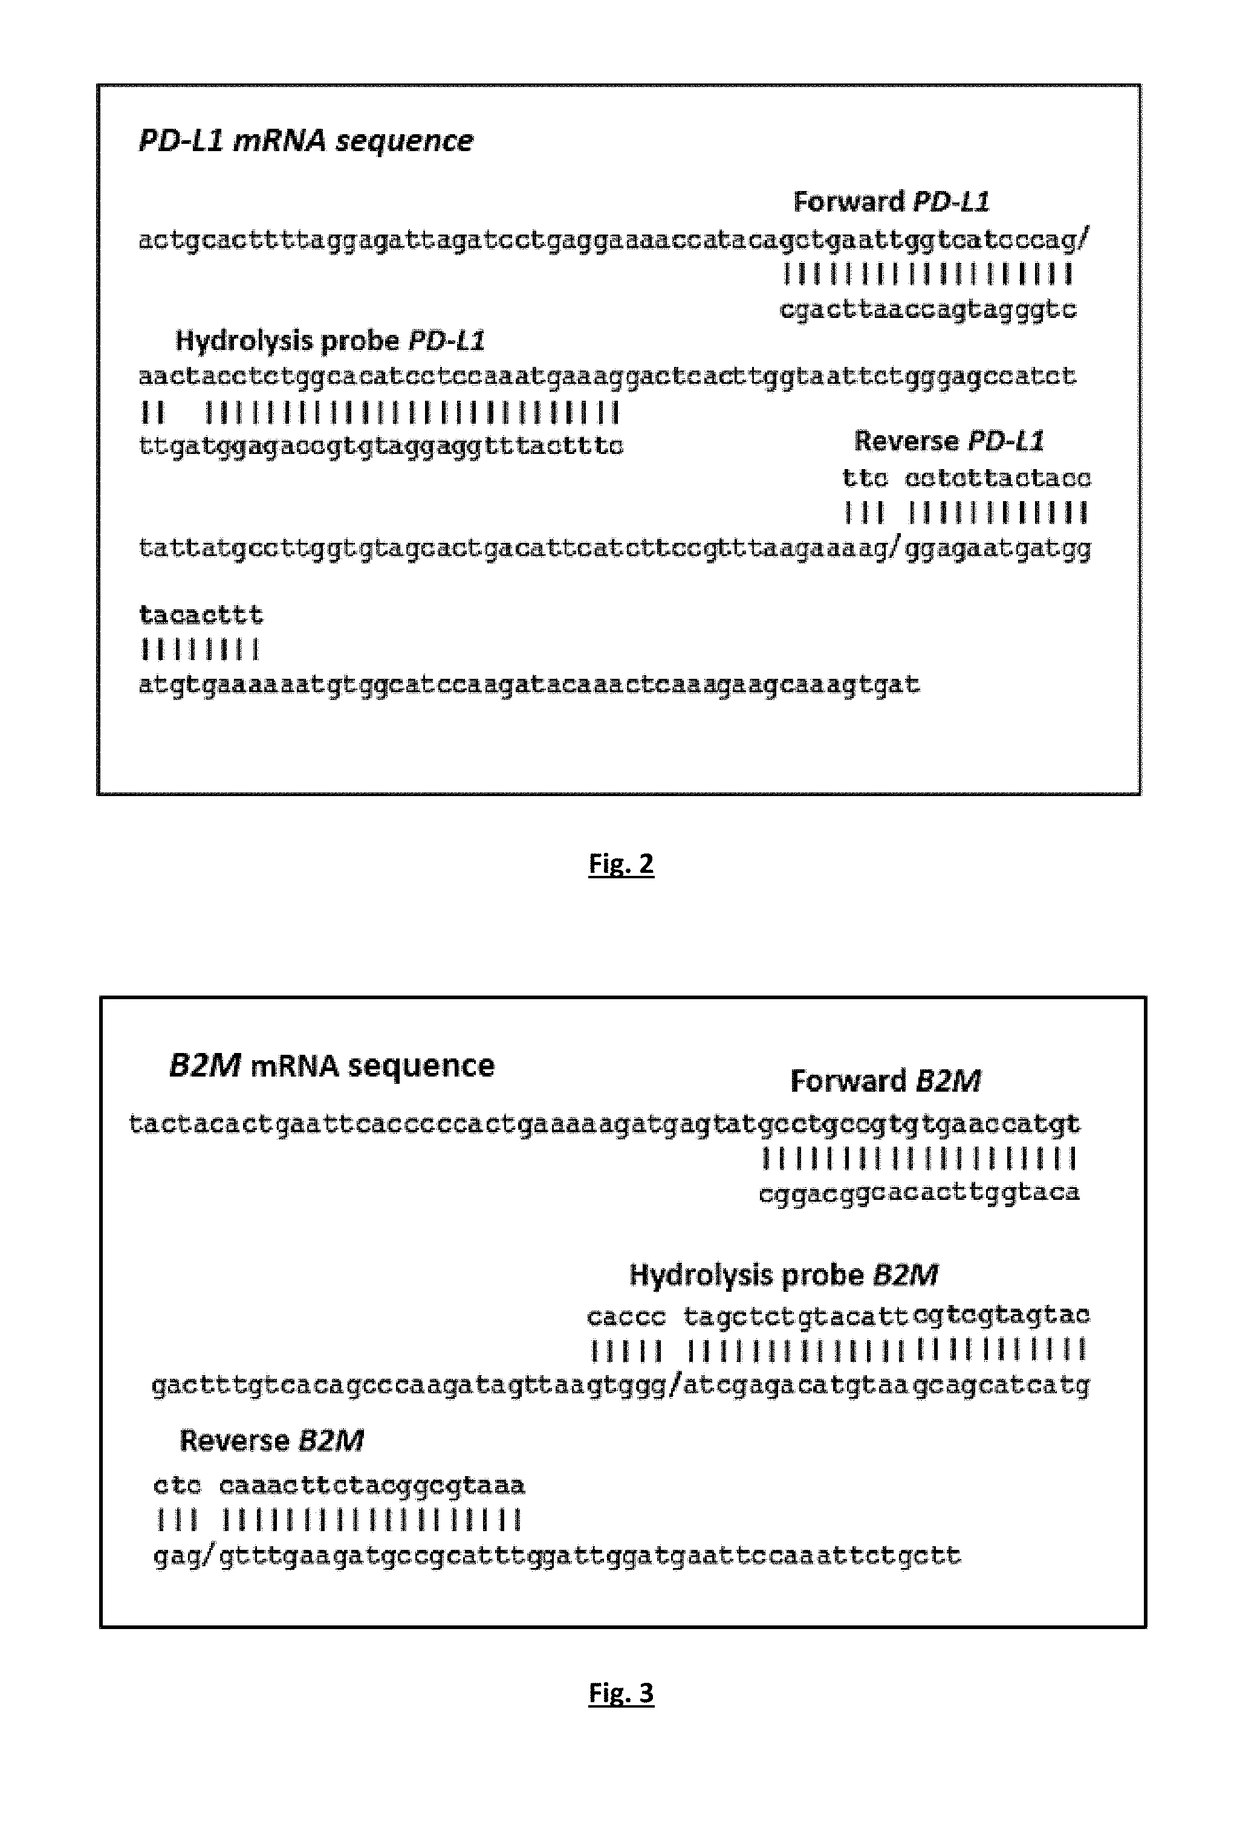 Method for the quantification of pd-l1 expression